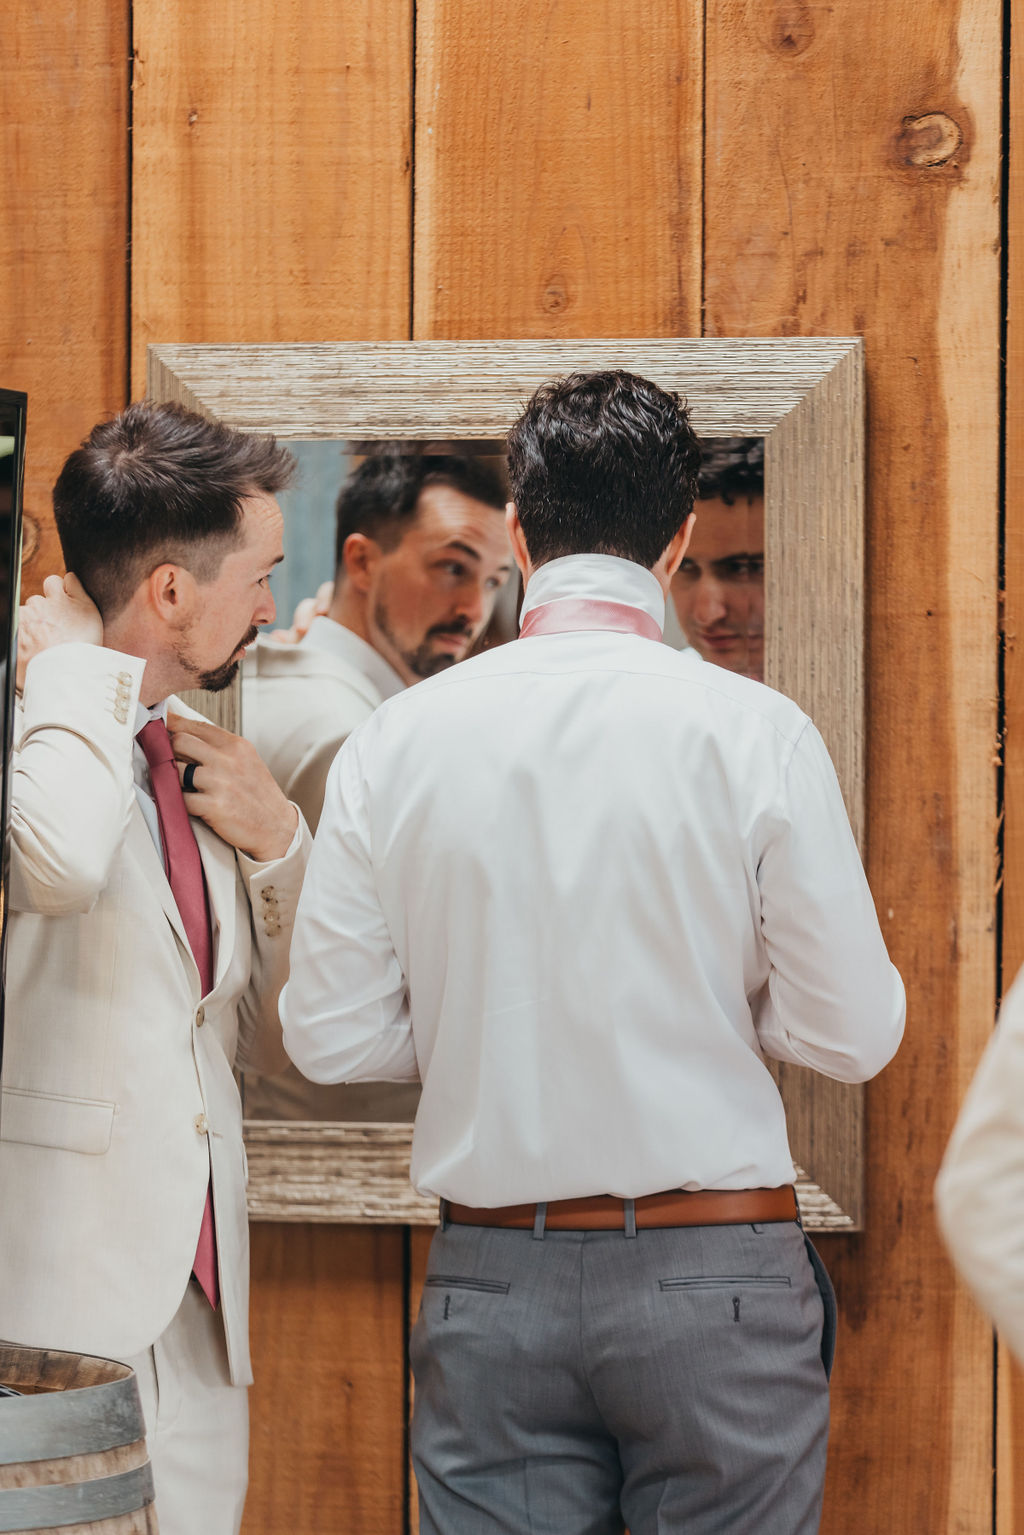 Two men in formal attire stand in front of a mirror. One adjusts his necktie while the other looks at his reflection. They are in a wooden-paneled room.